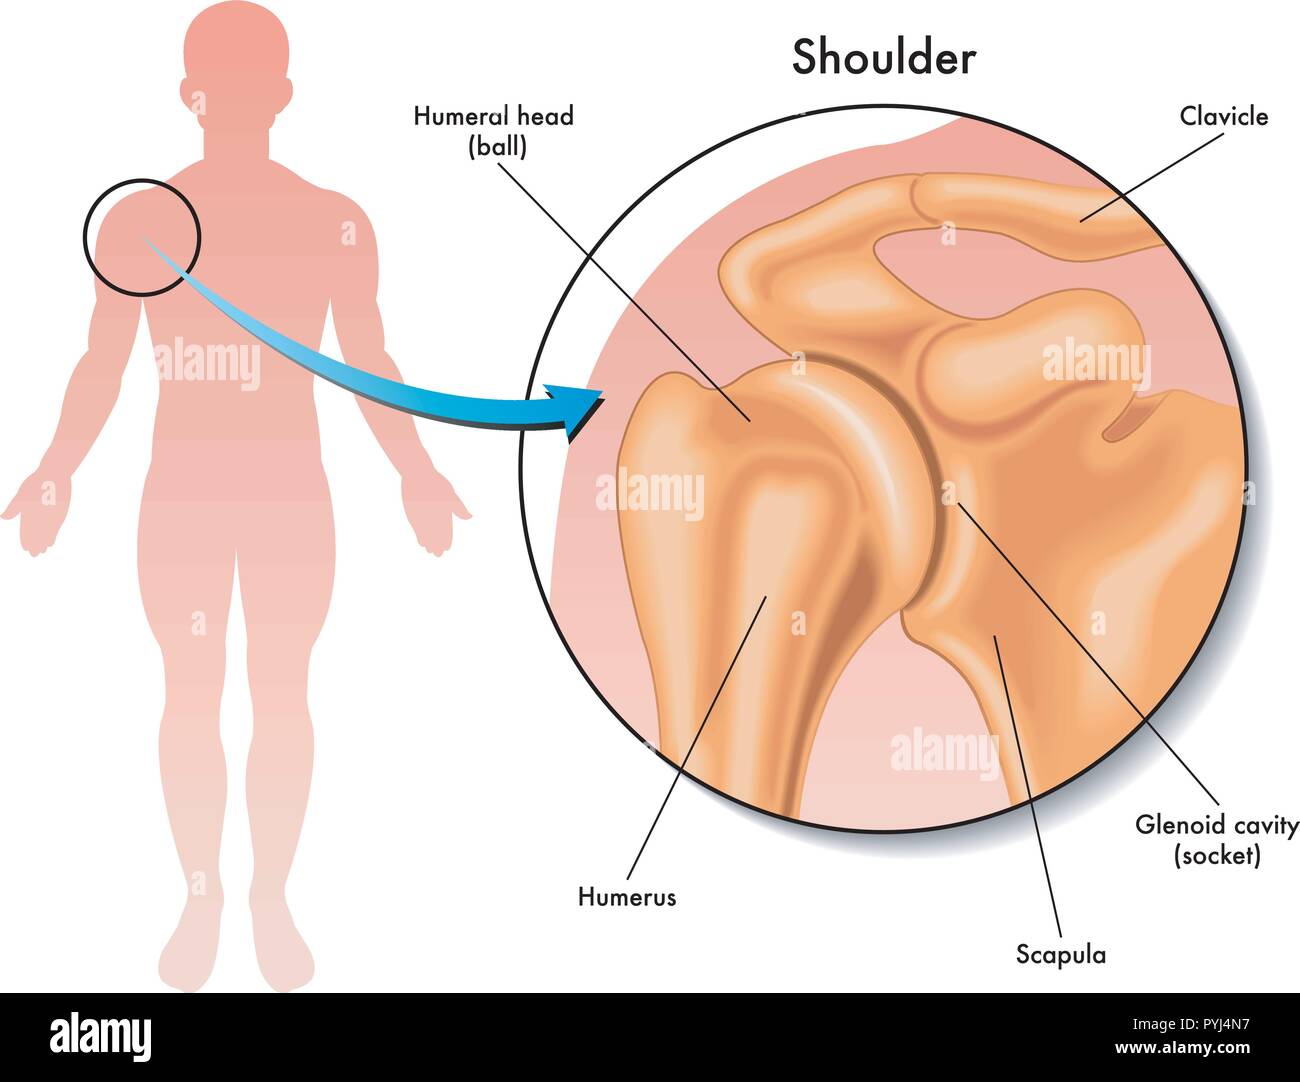 Diagram Of Shoulder : The Shoulder Joint Structure Movement Teachmeanatomy / Shoulder joint of human body anatomy infographic diagram with all parts including bones ligaments muscles bursa cavity capsule cartilage membrane for medical science education and health care.